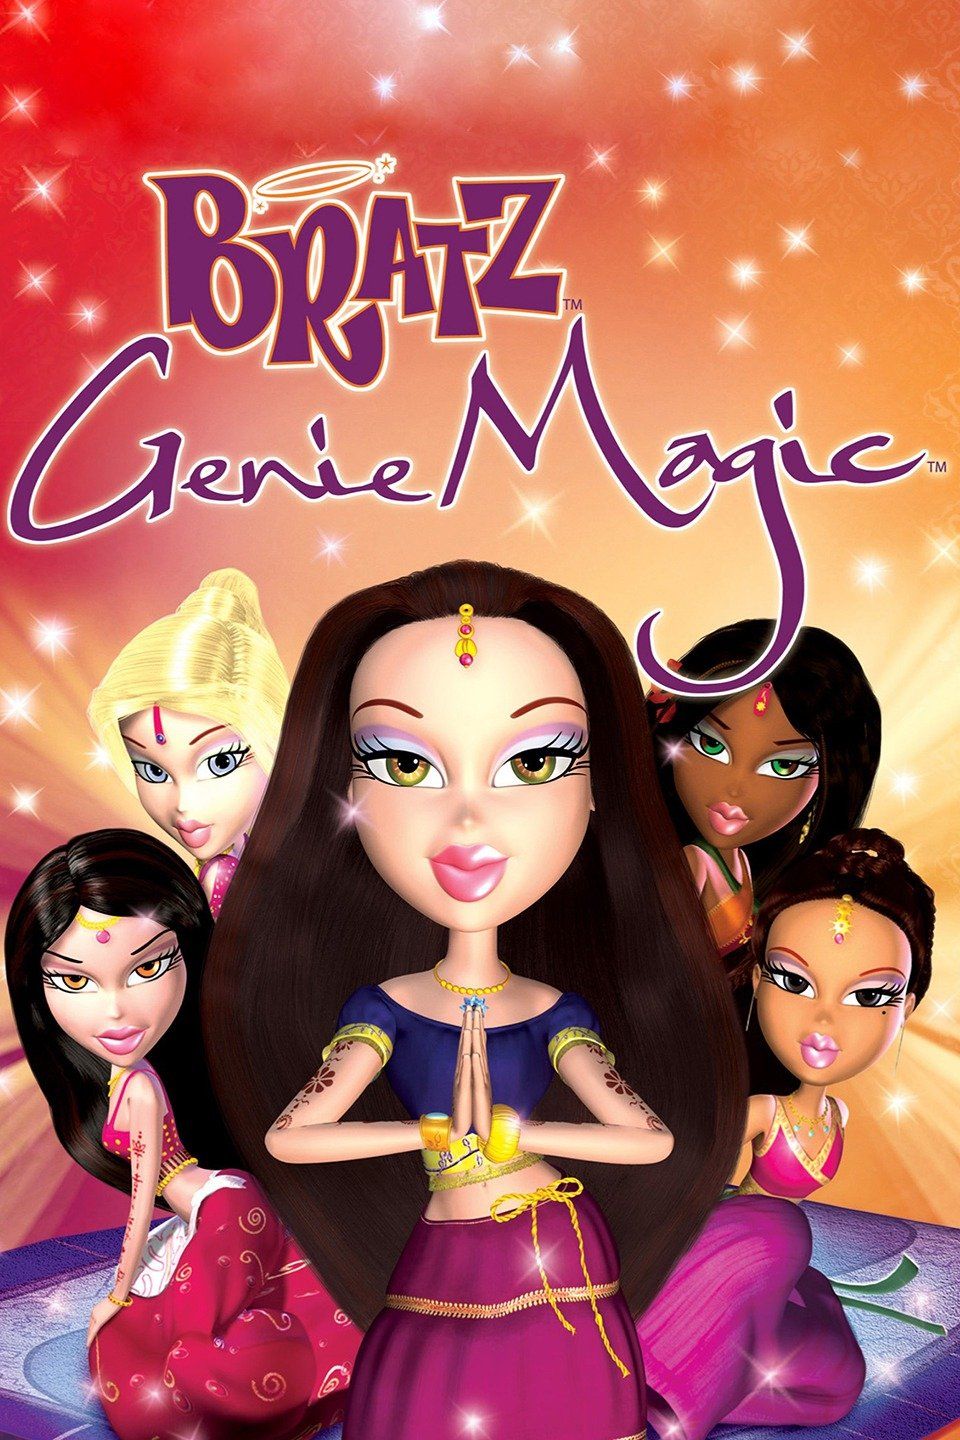 Bratz on X: The rumors are true! The girls w a passion 4 dancing